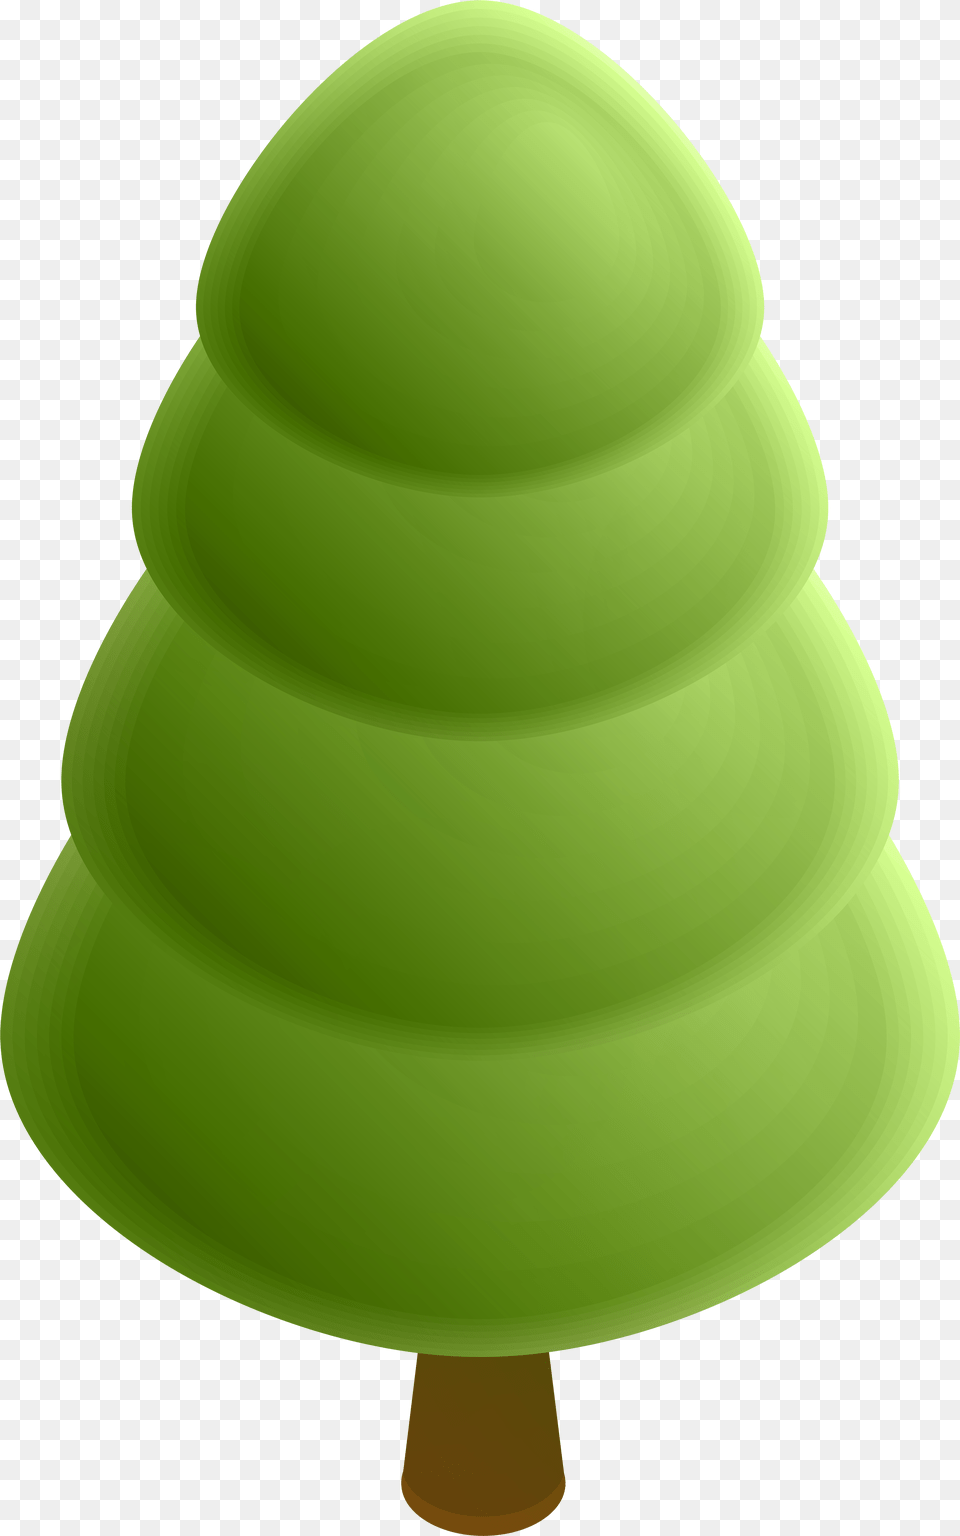 Pine Tree Clip Art Is Available For, Green Png Image